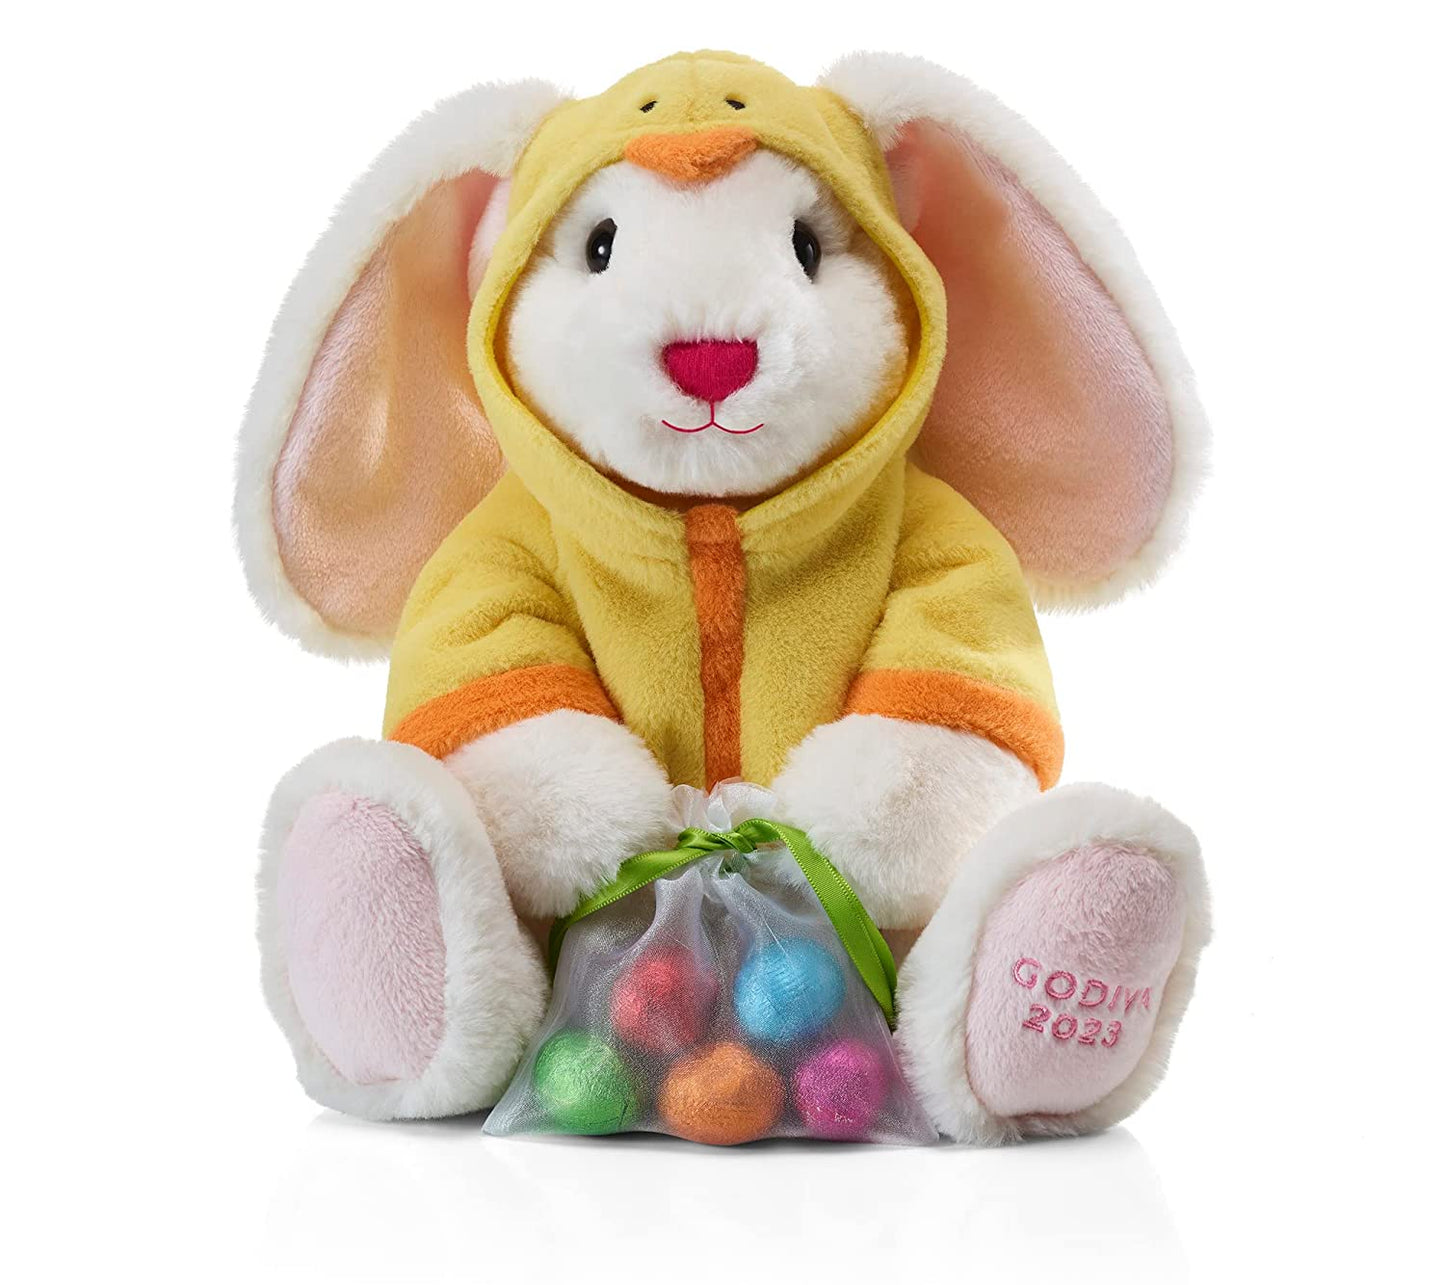 Godiva Chocolatier Easter and Plush Bunny - Limited Edition Bunny - Individually Wrapped Chocolate Eggs in Various Flavors - Easter Candy Gift